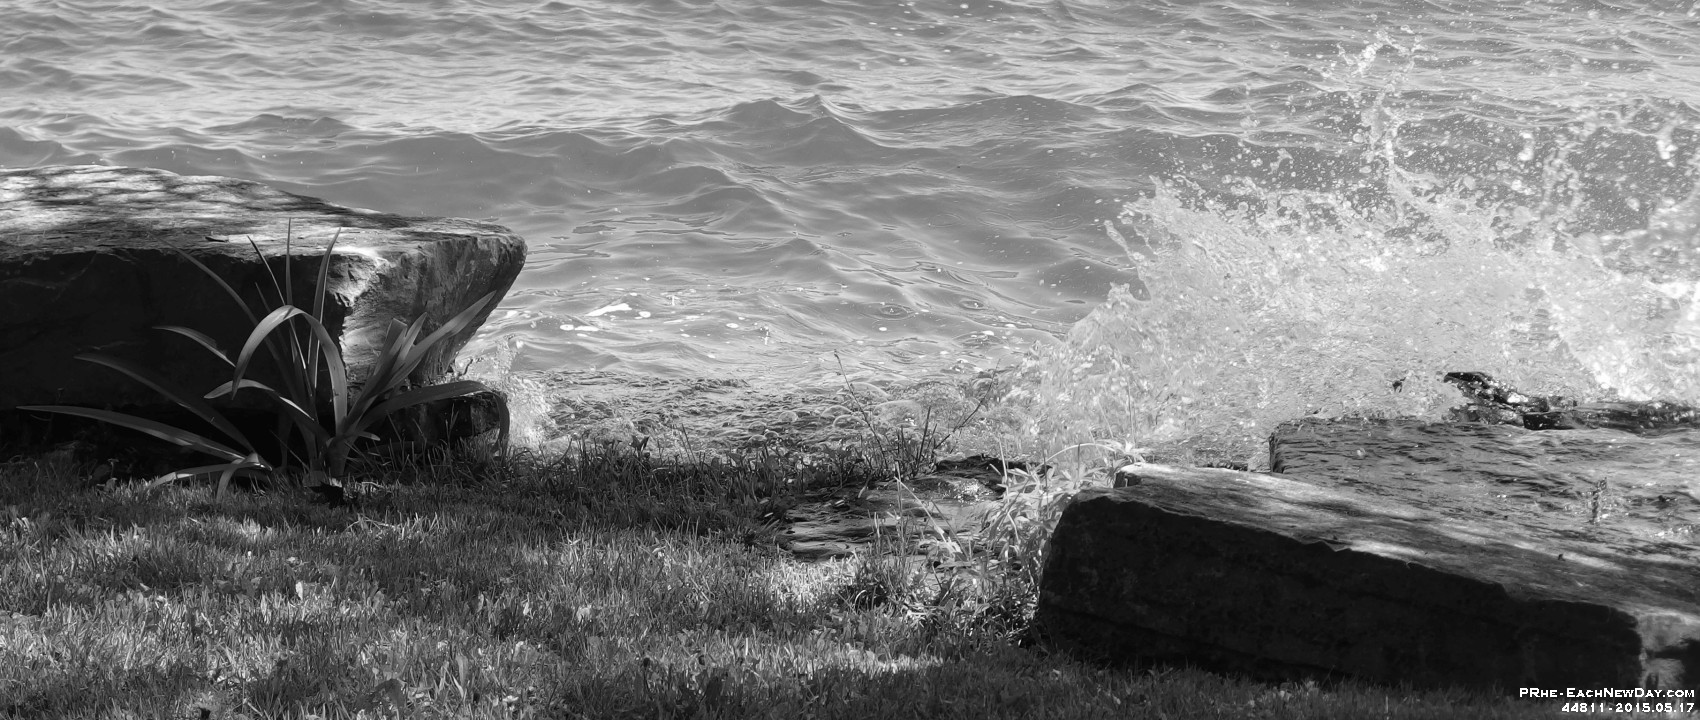 44811CrBwLe - Anniversary trip to the cottage with Beth - Views of water splashing